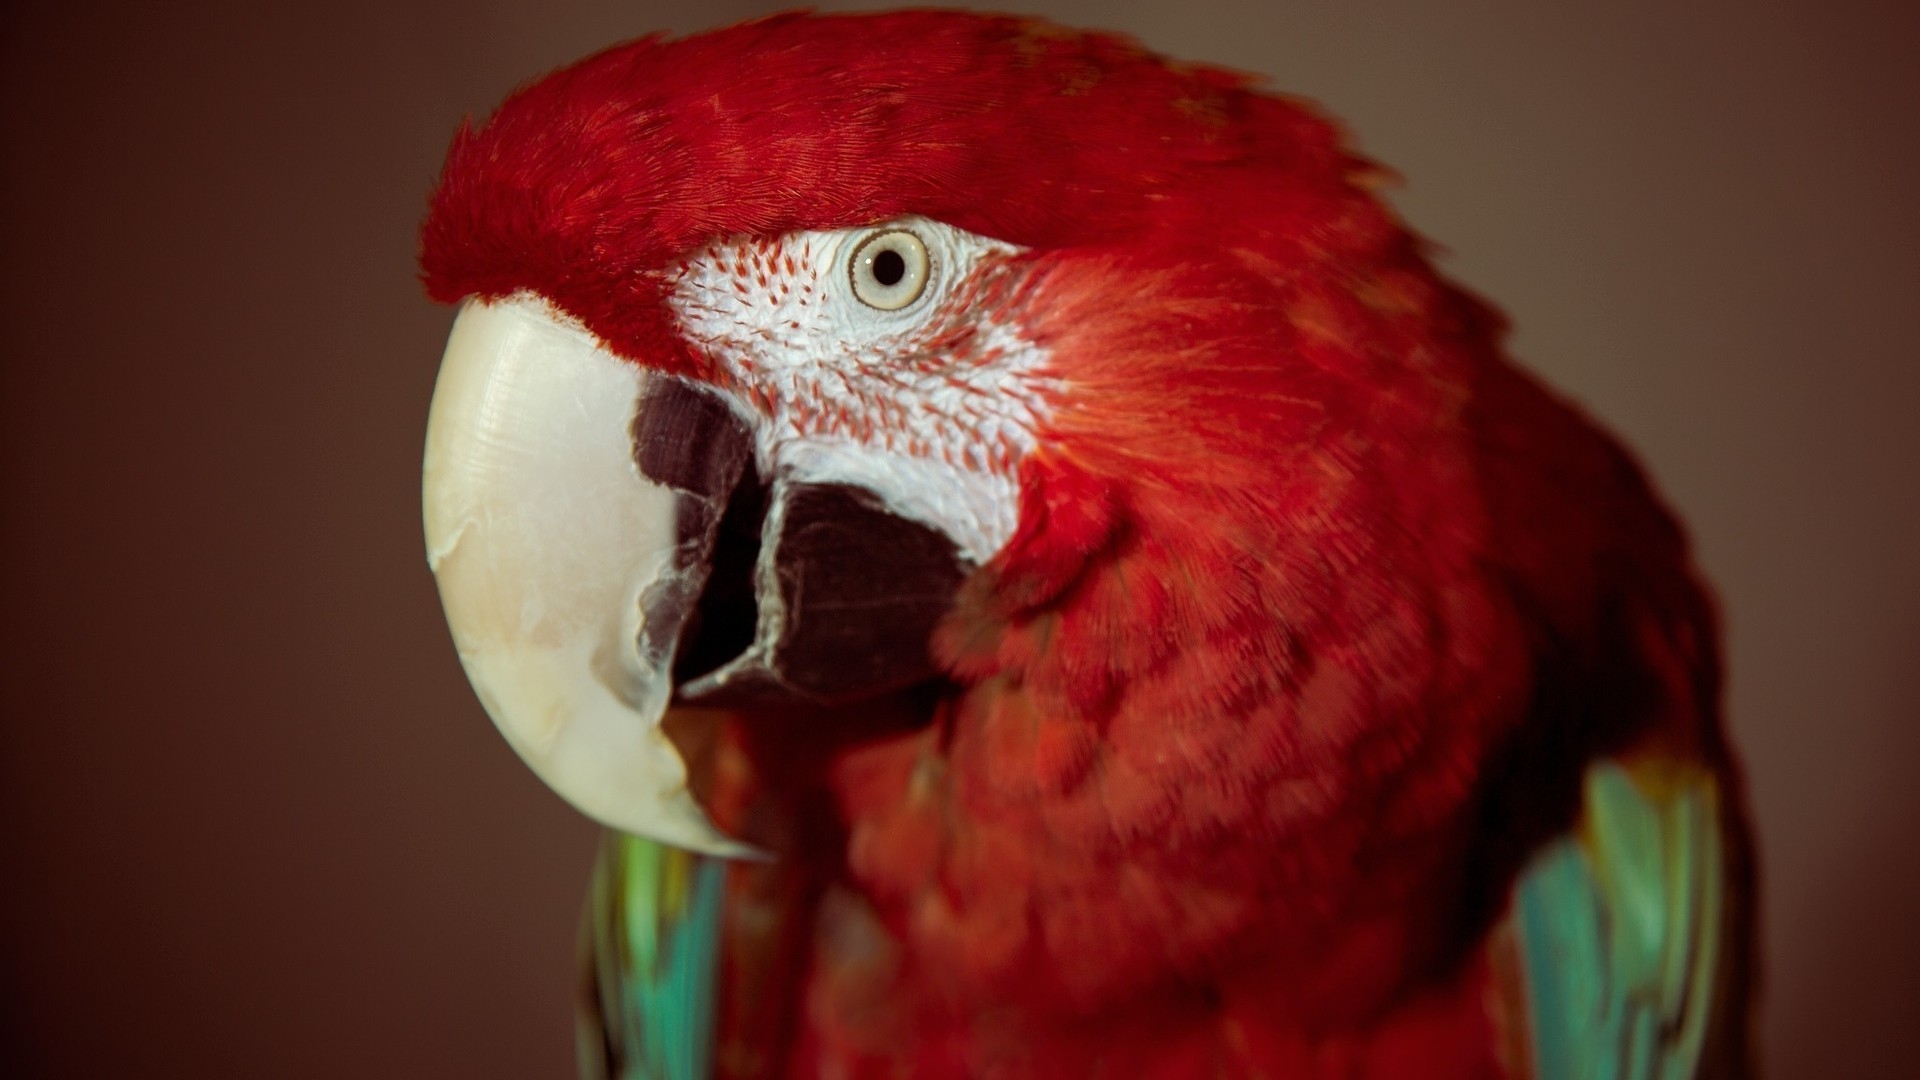 Red Parrot for 1920 x 1080 HDTV 1080p resolution